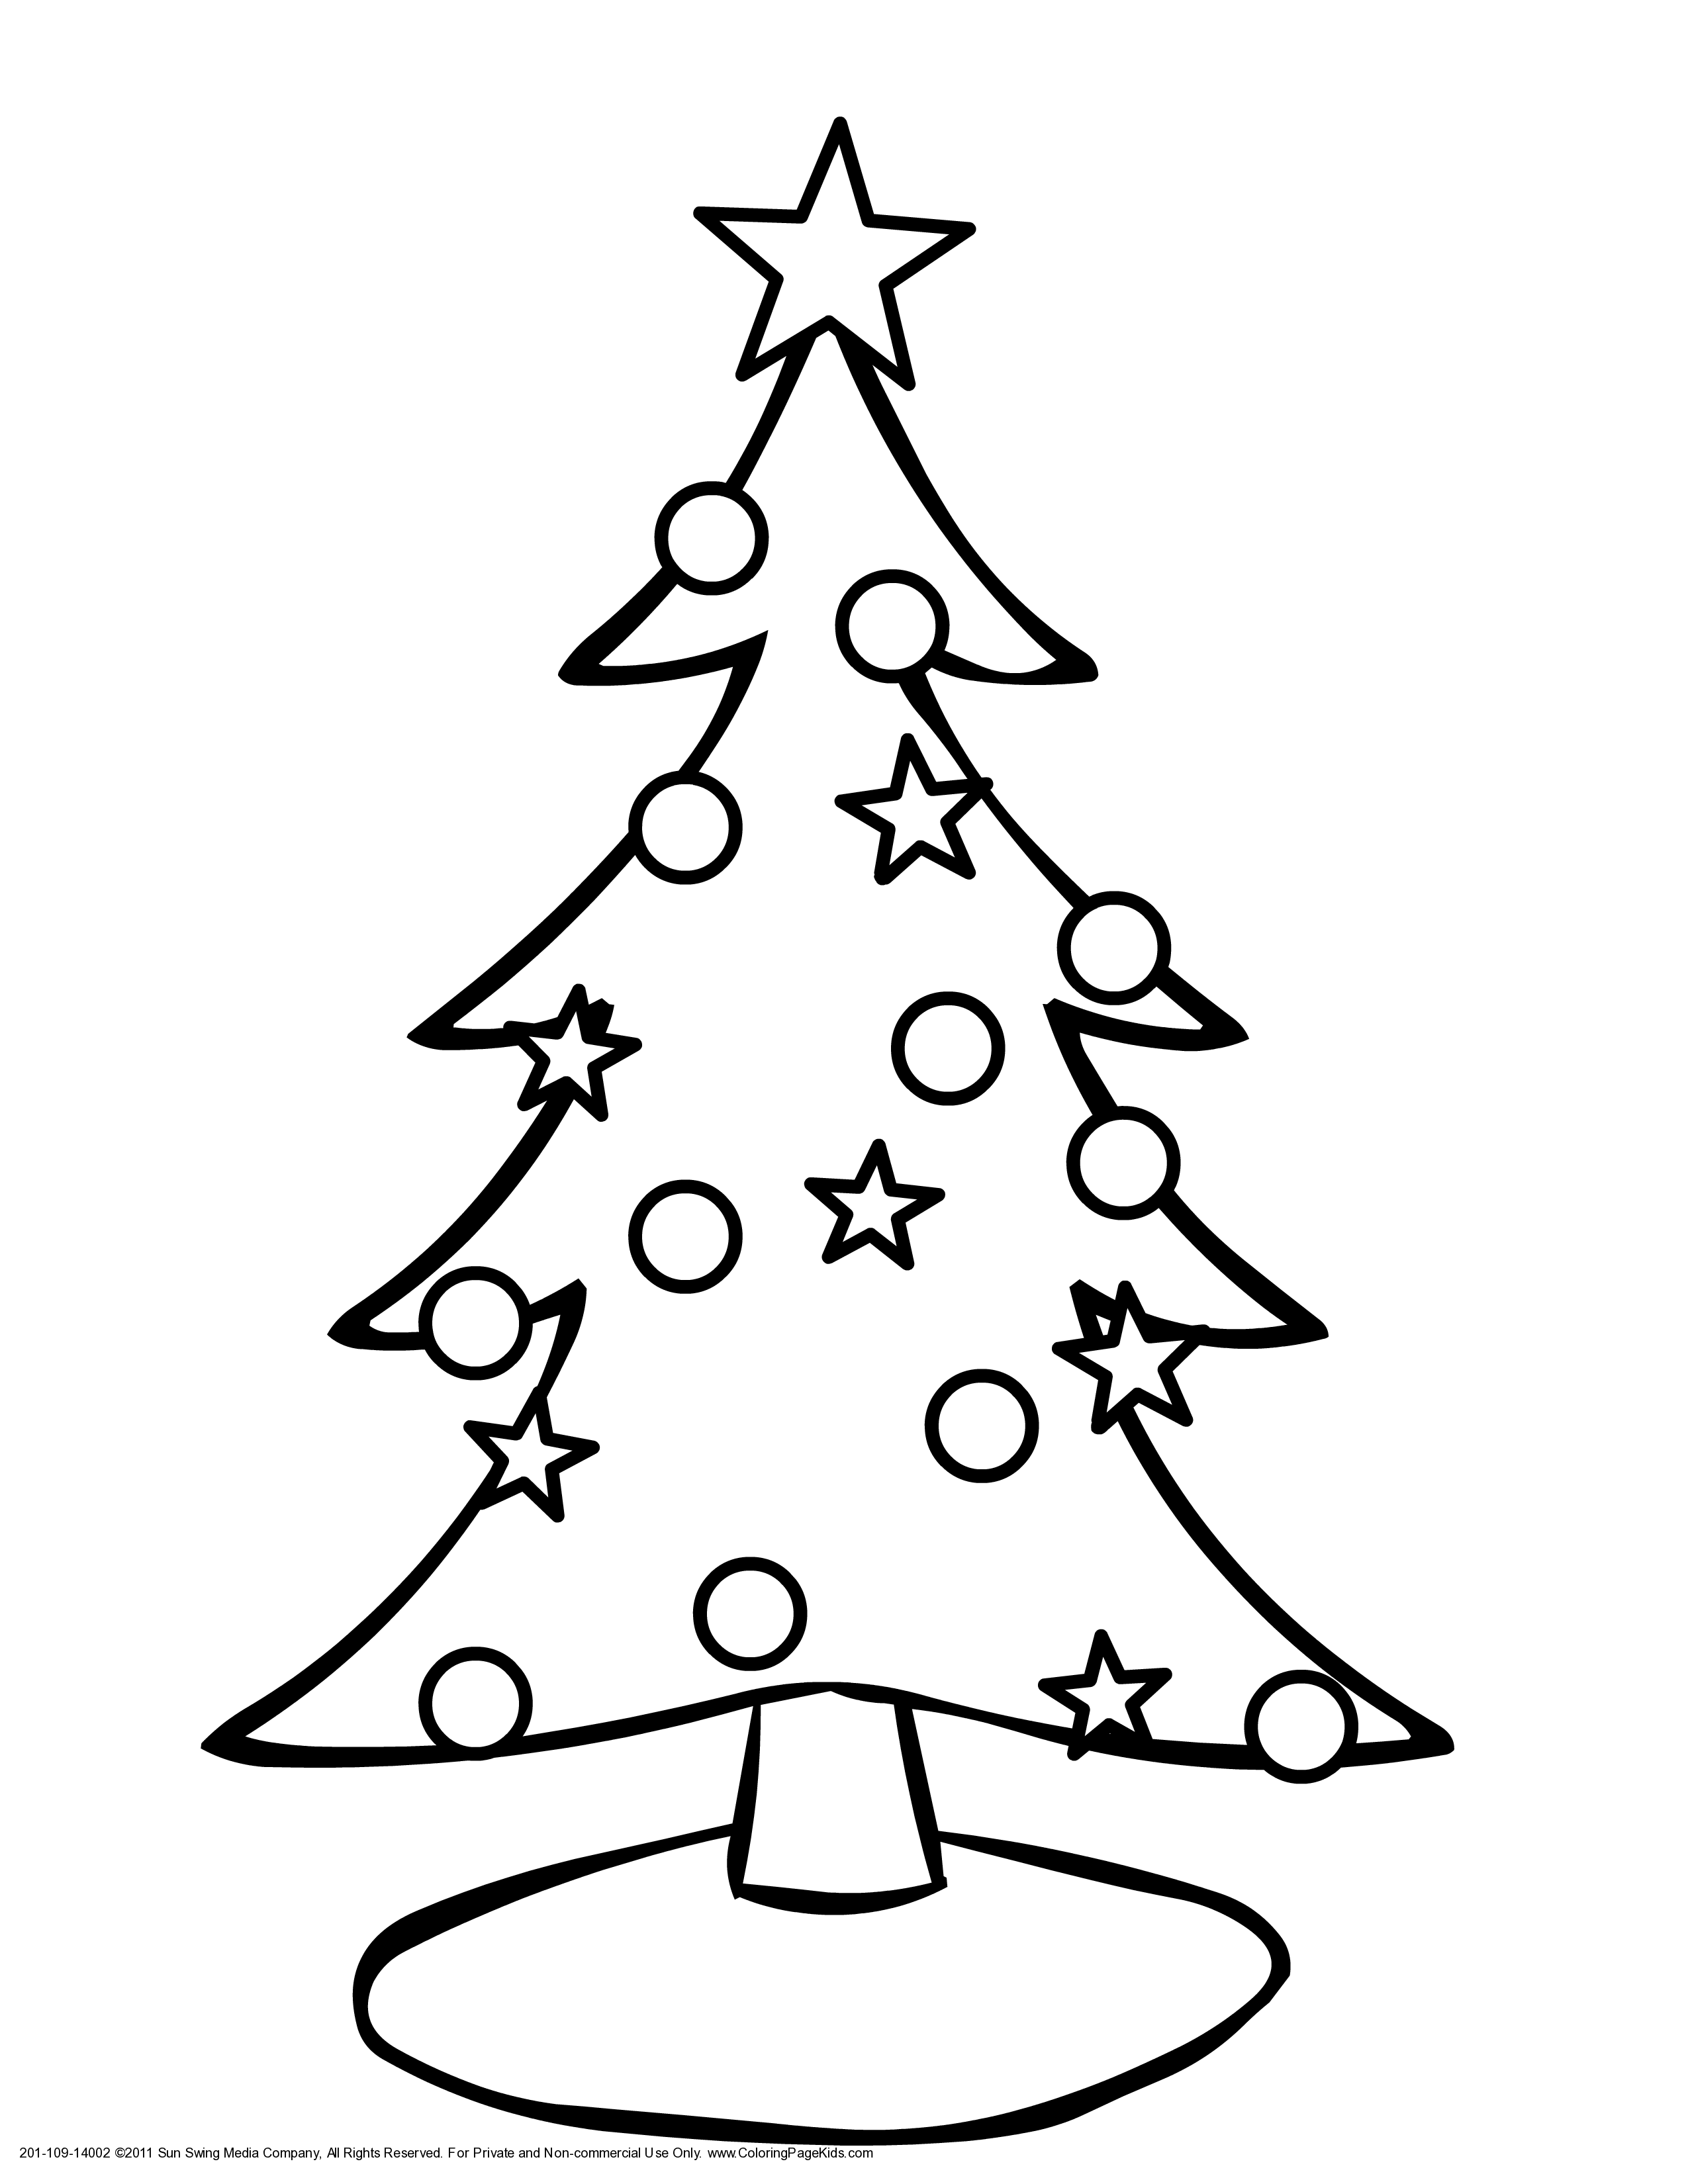 outdoor-christmas-tree-coloring-page-christmas-ornament-coloring-page